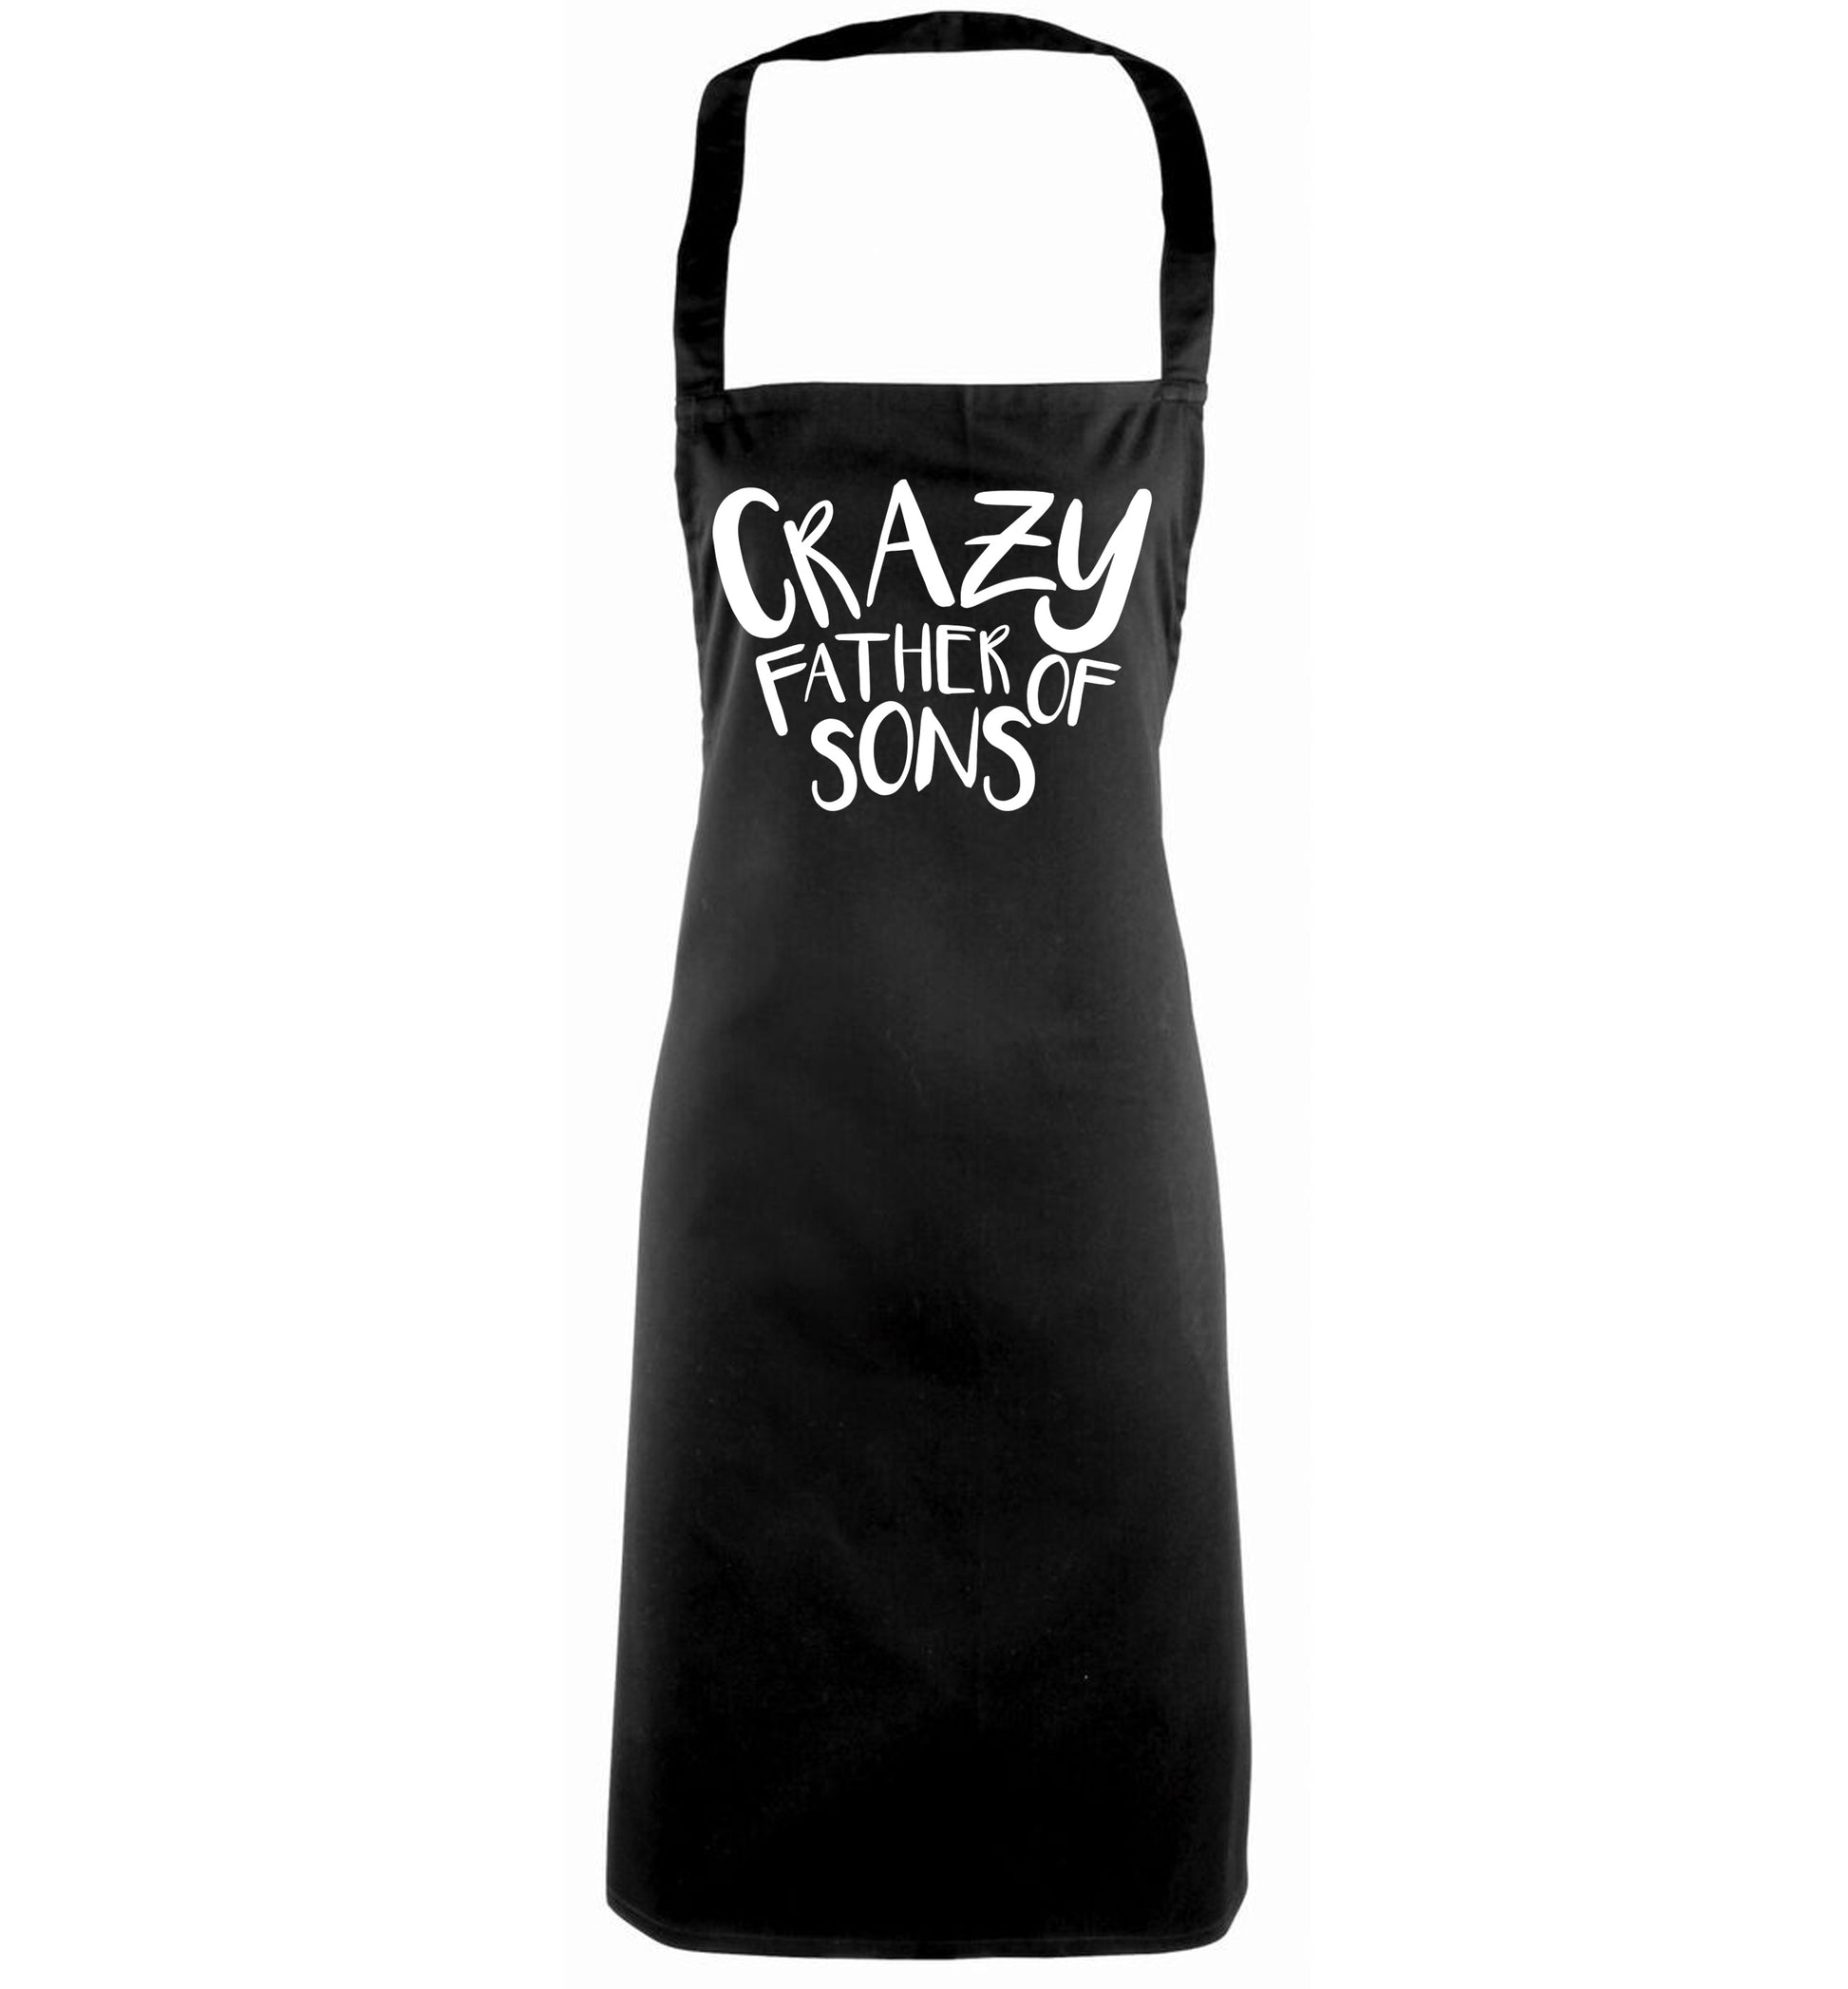 Crazy father of sons black apron